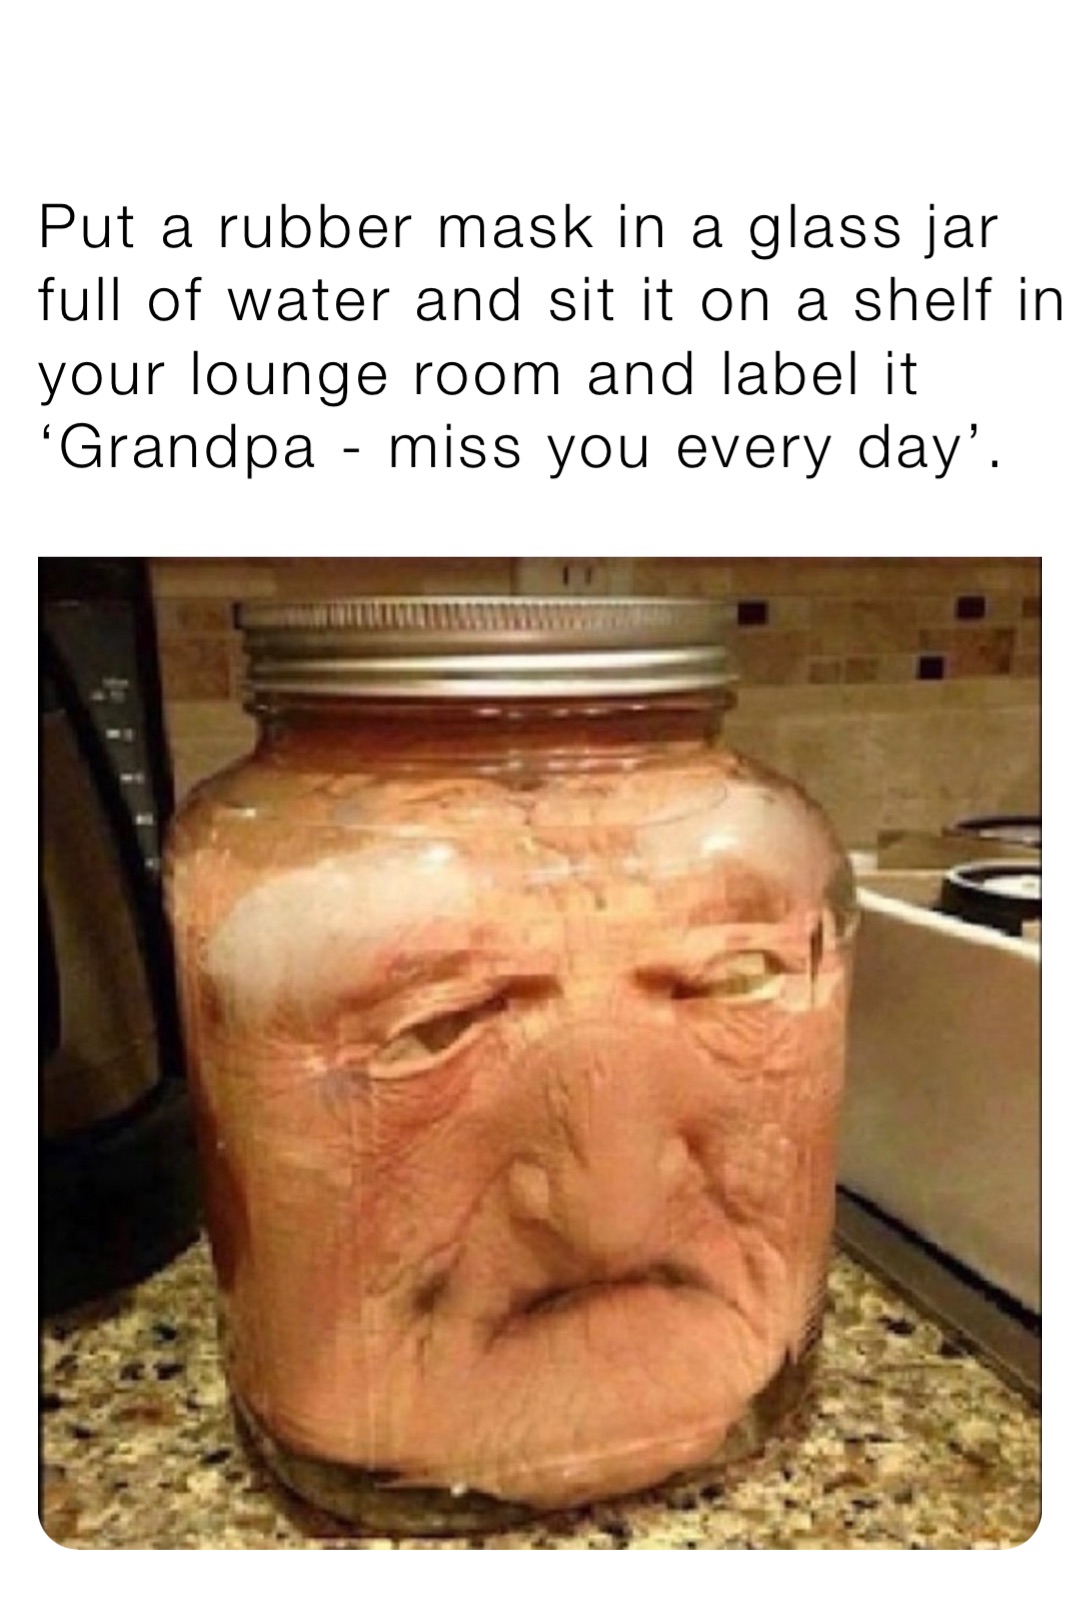 Put a rubber mask in a glass jar full of water and sit it on a shelf in your lounge room and label it ‘Grandpa - miss you every day’.